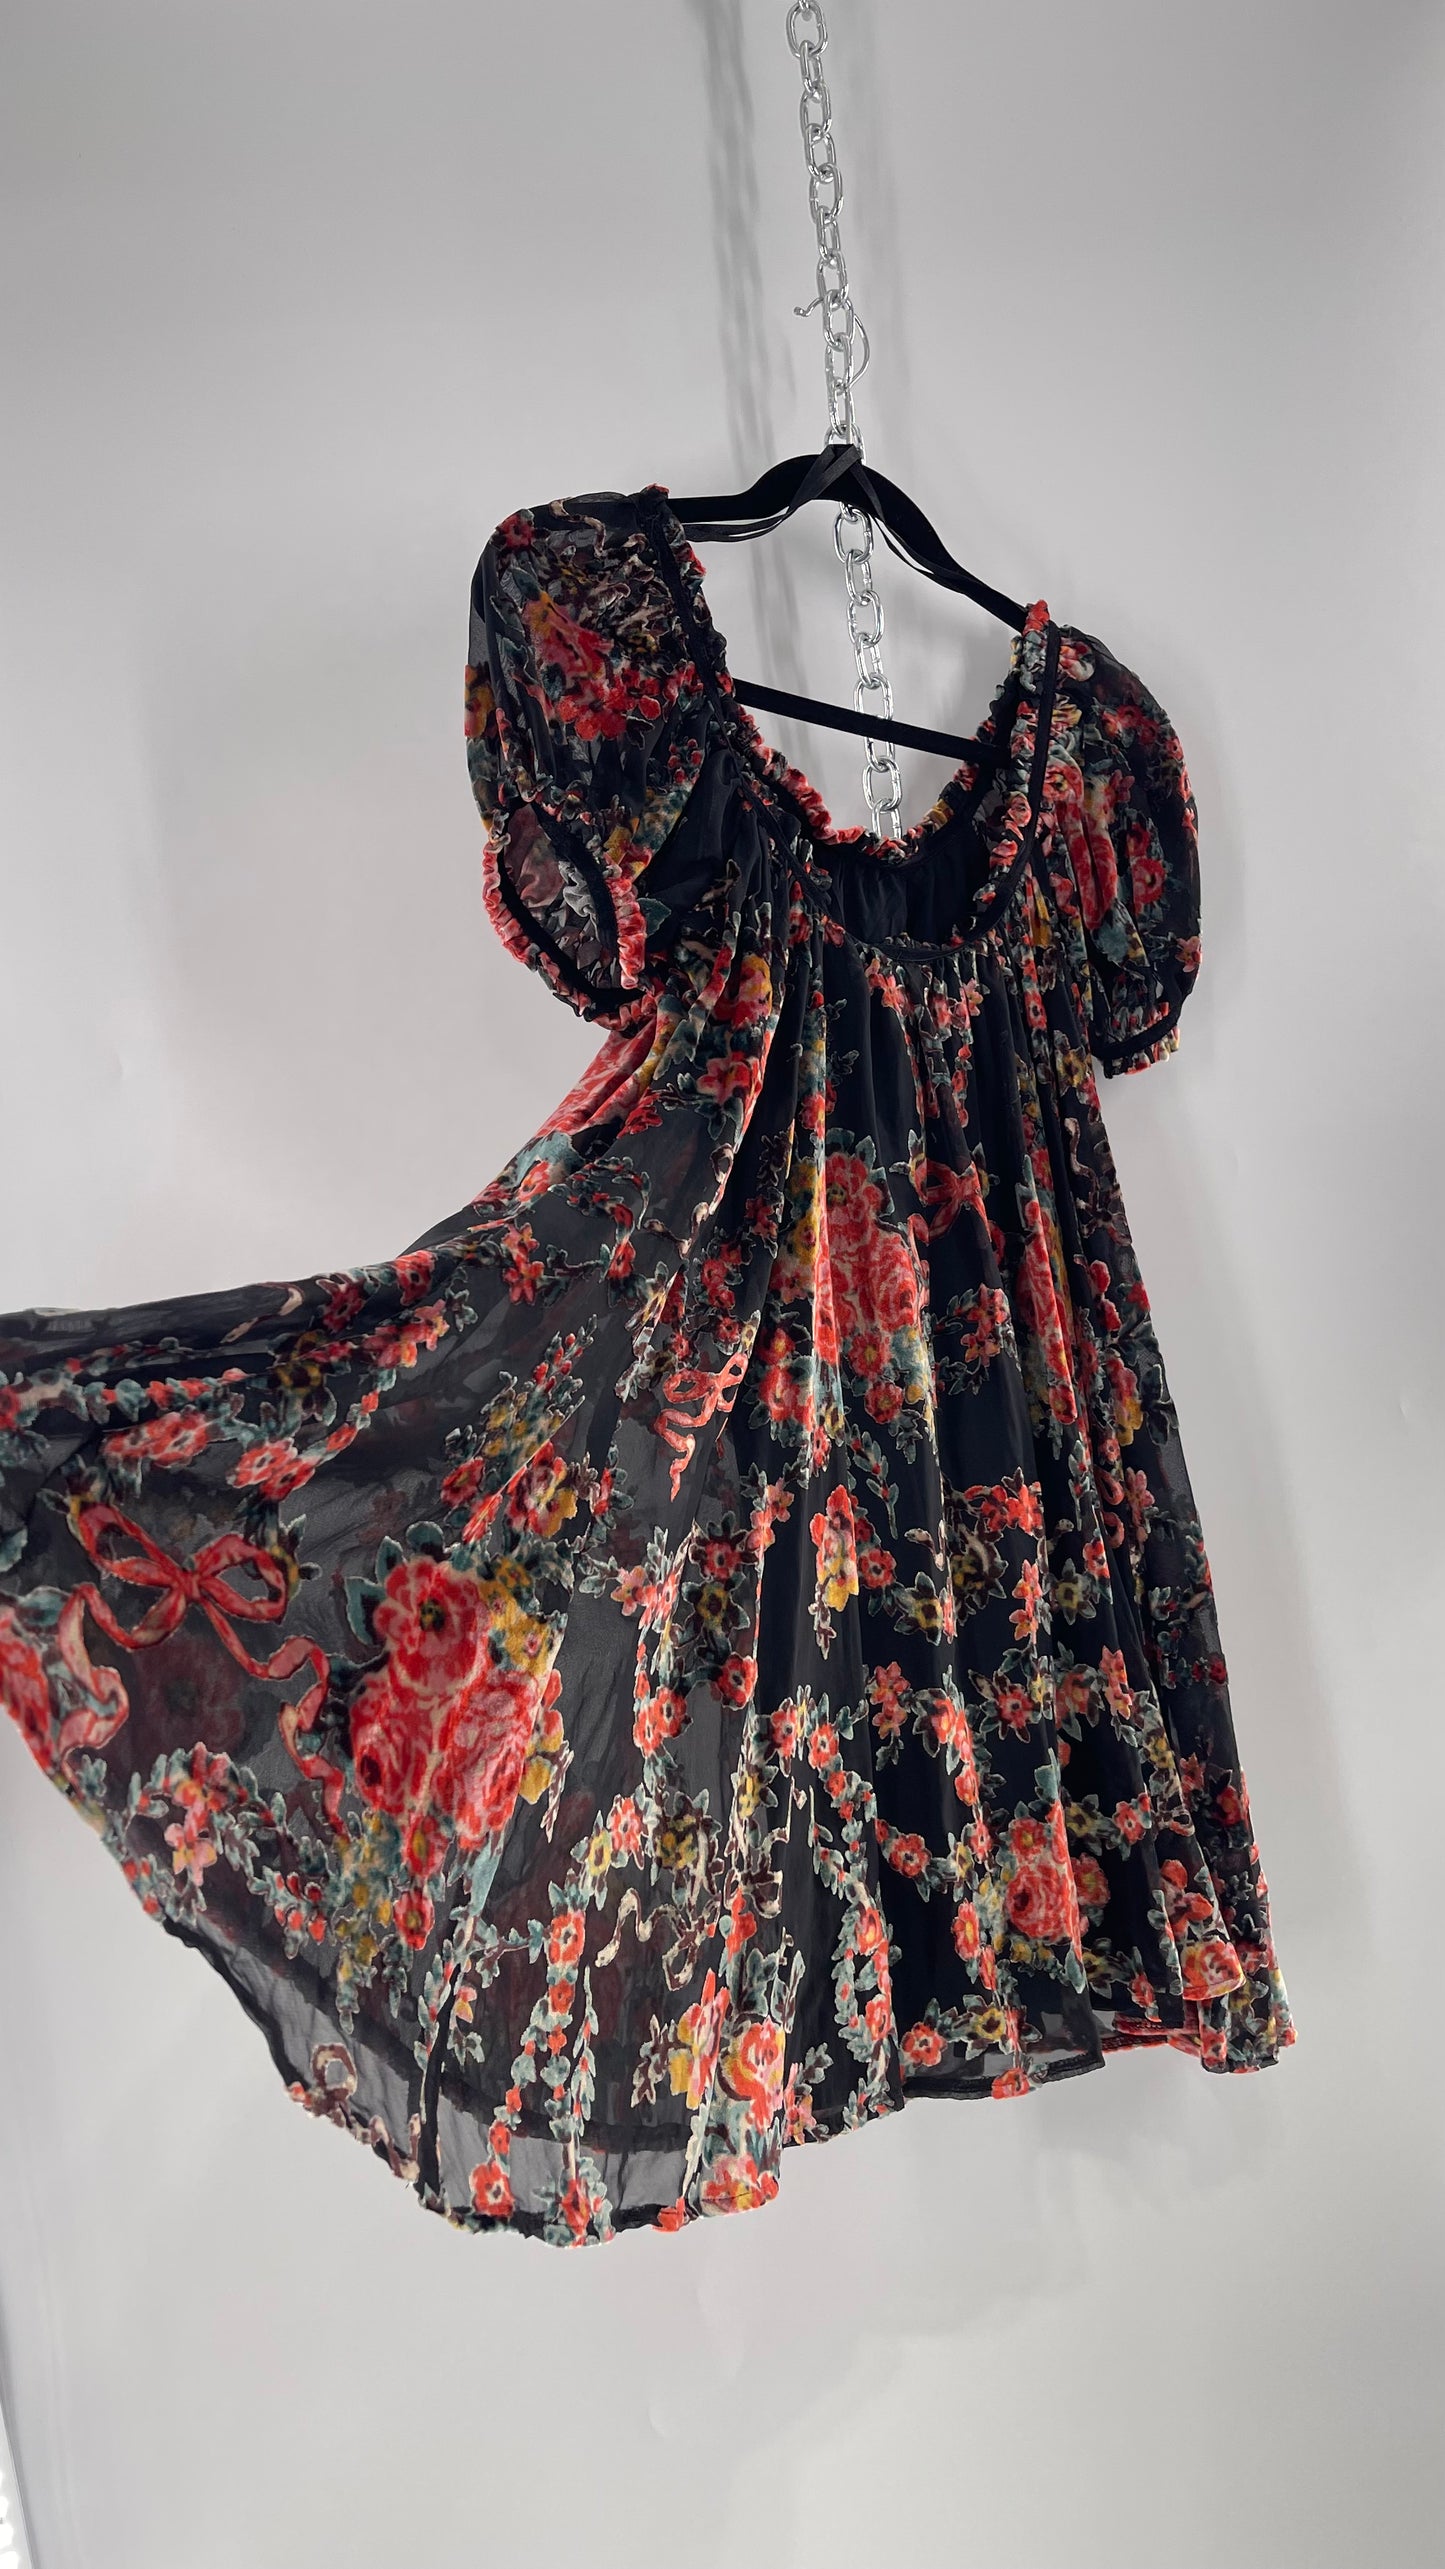 Free People Beautiful Blooms Velvet Florals Babydoll Dress (Small)